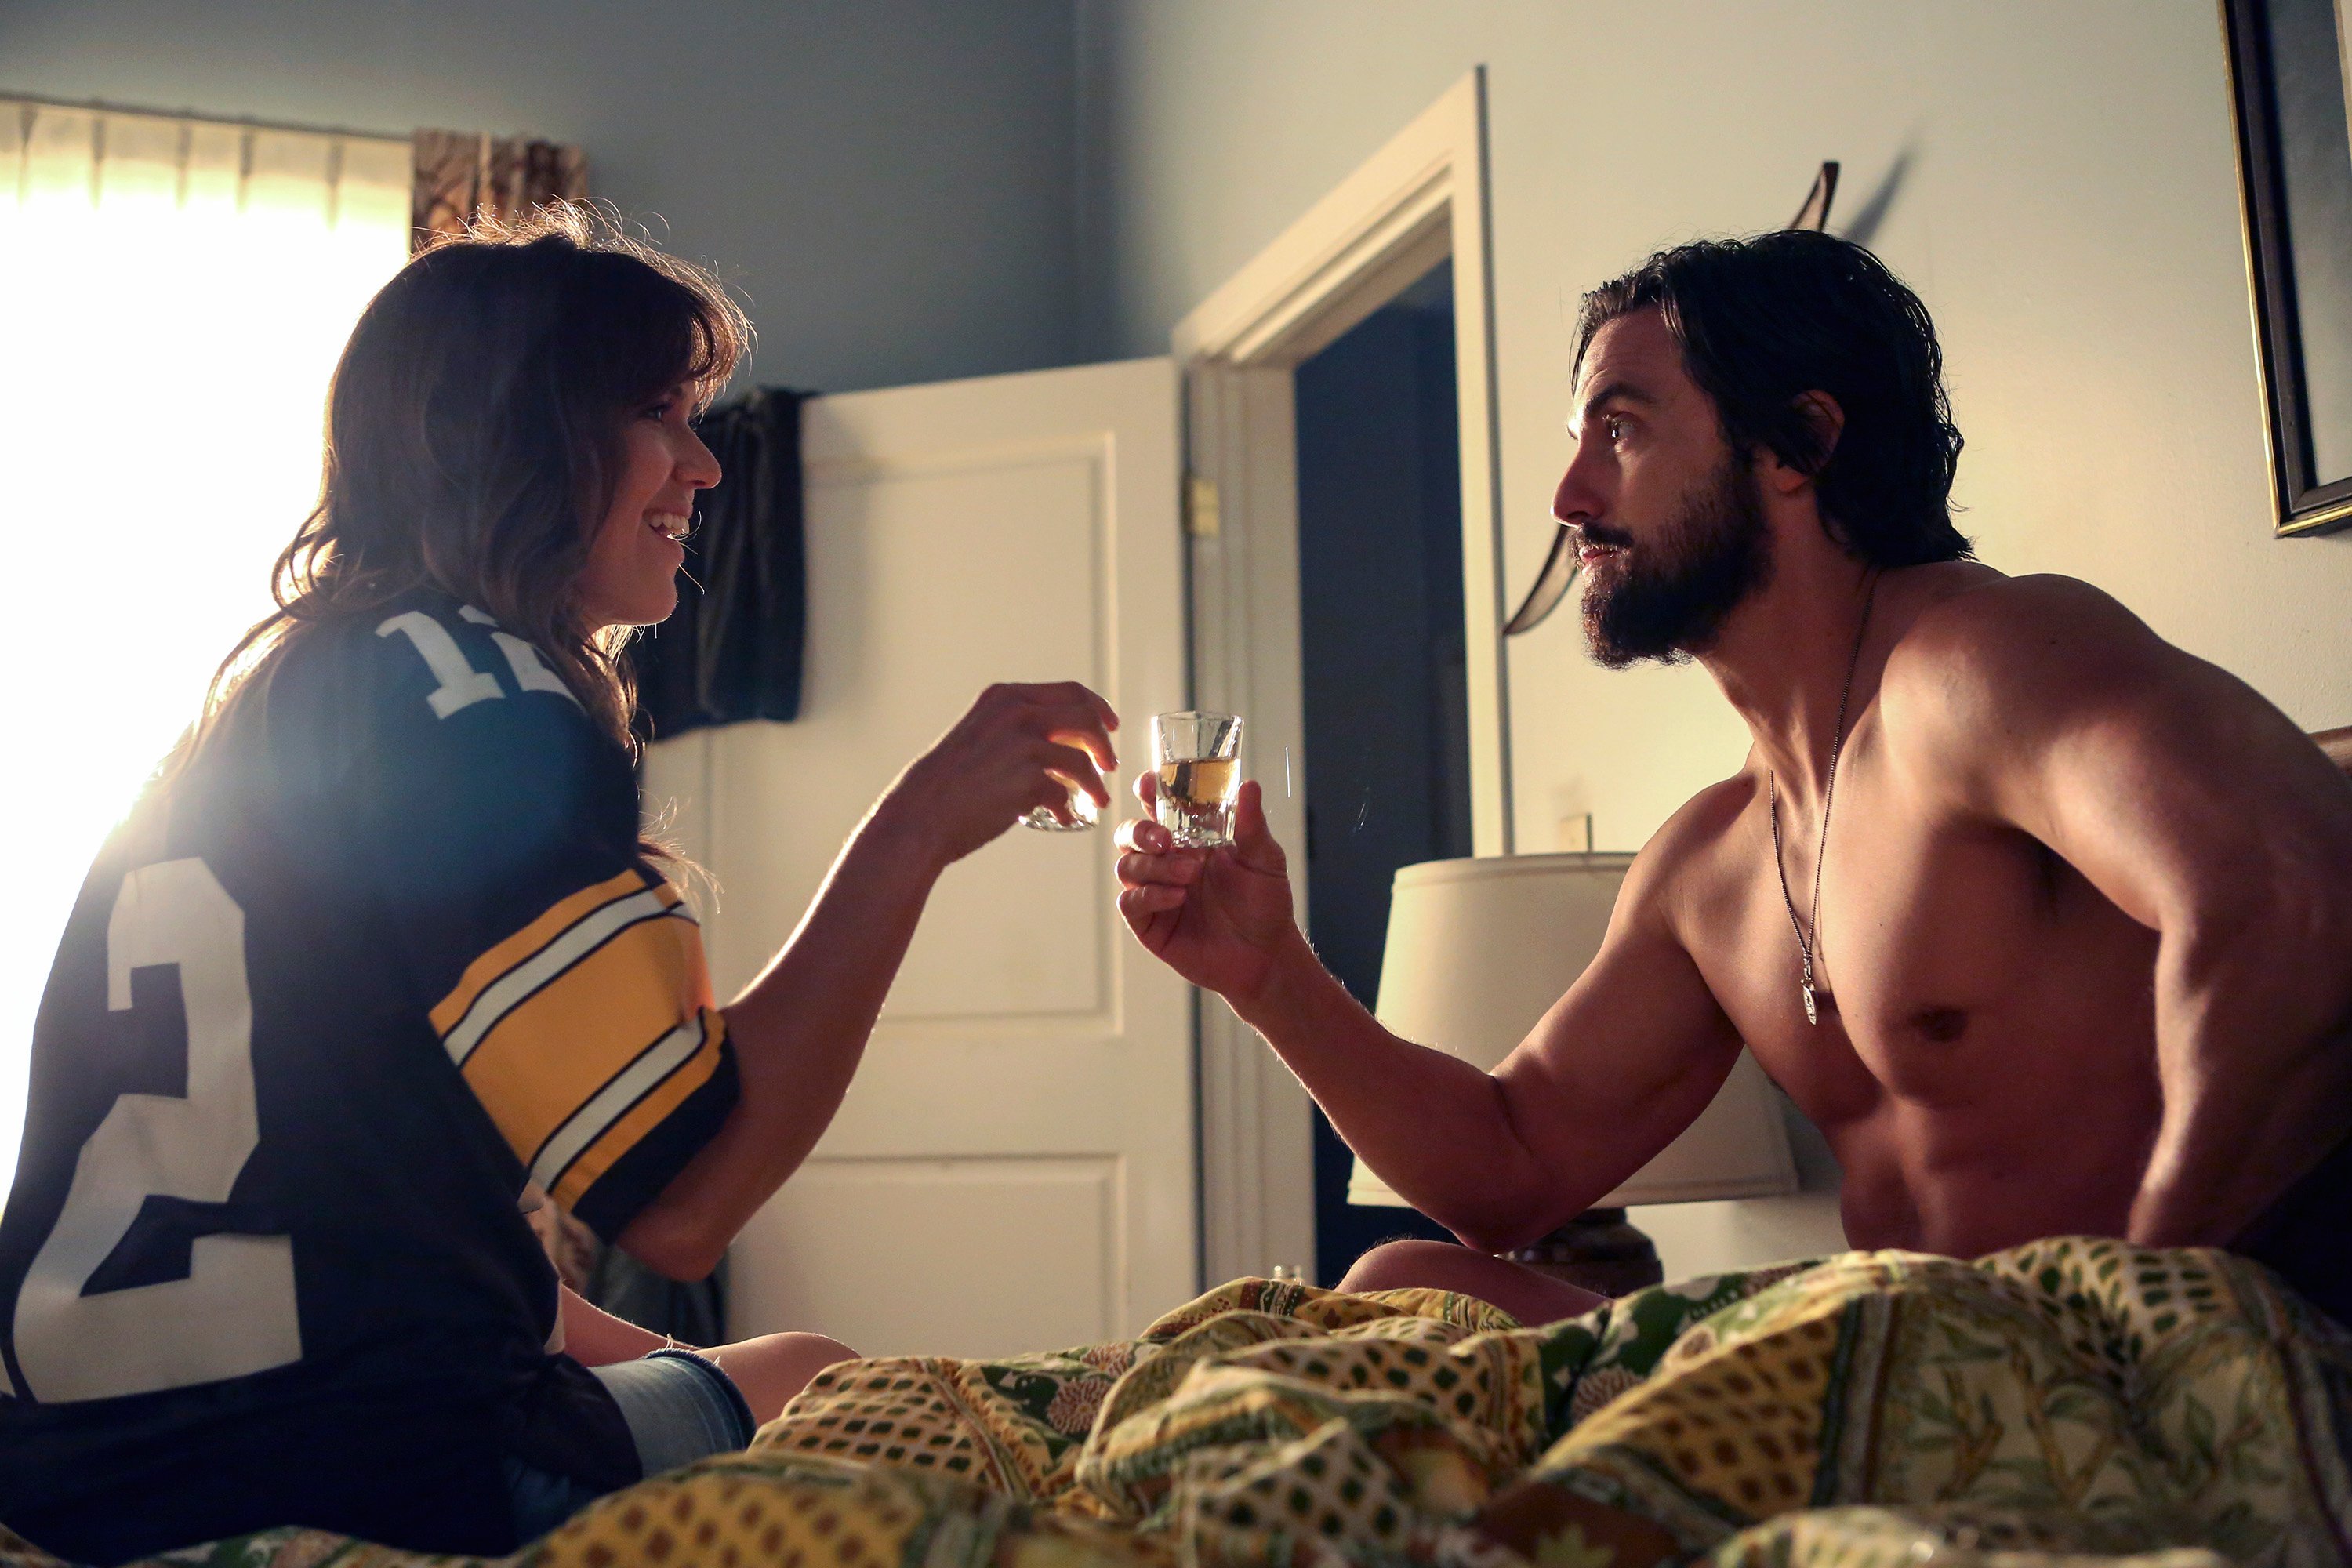 Mandy Moore and Milo Ventimiglia on the set of This Is Us season 1